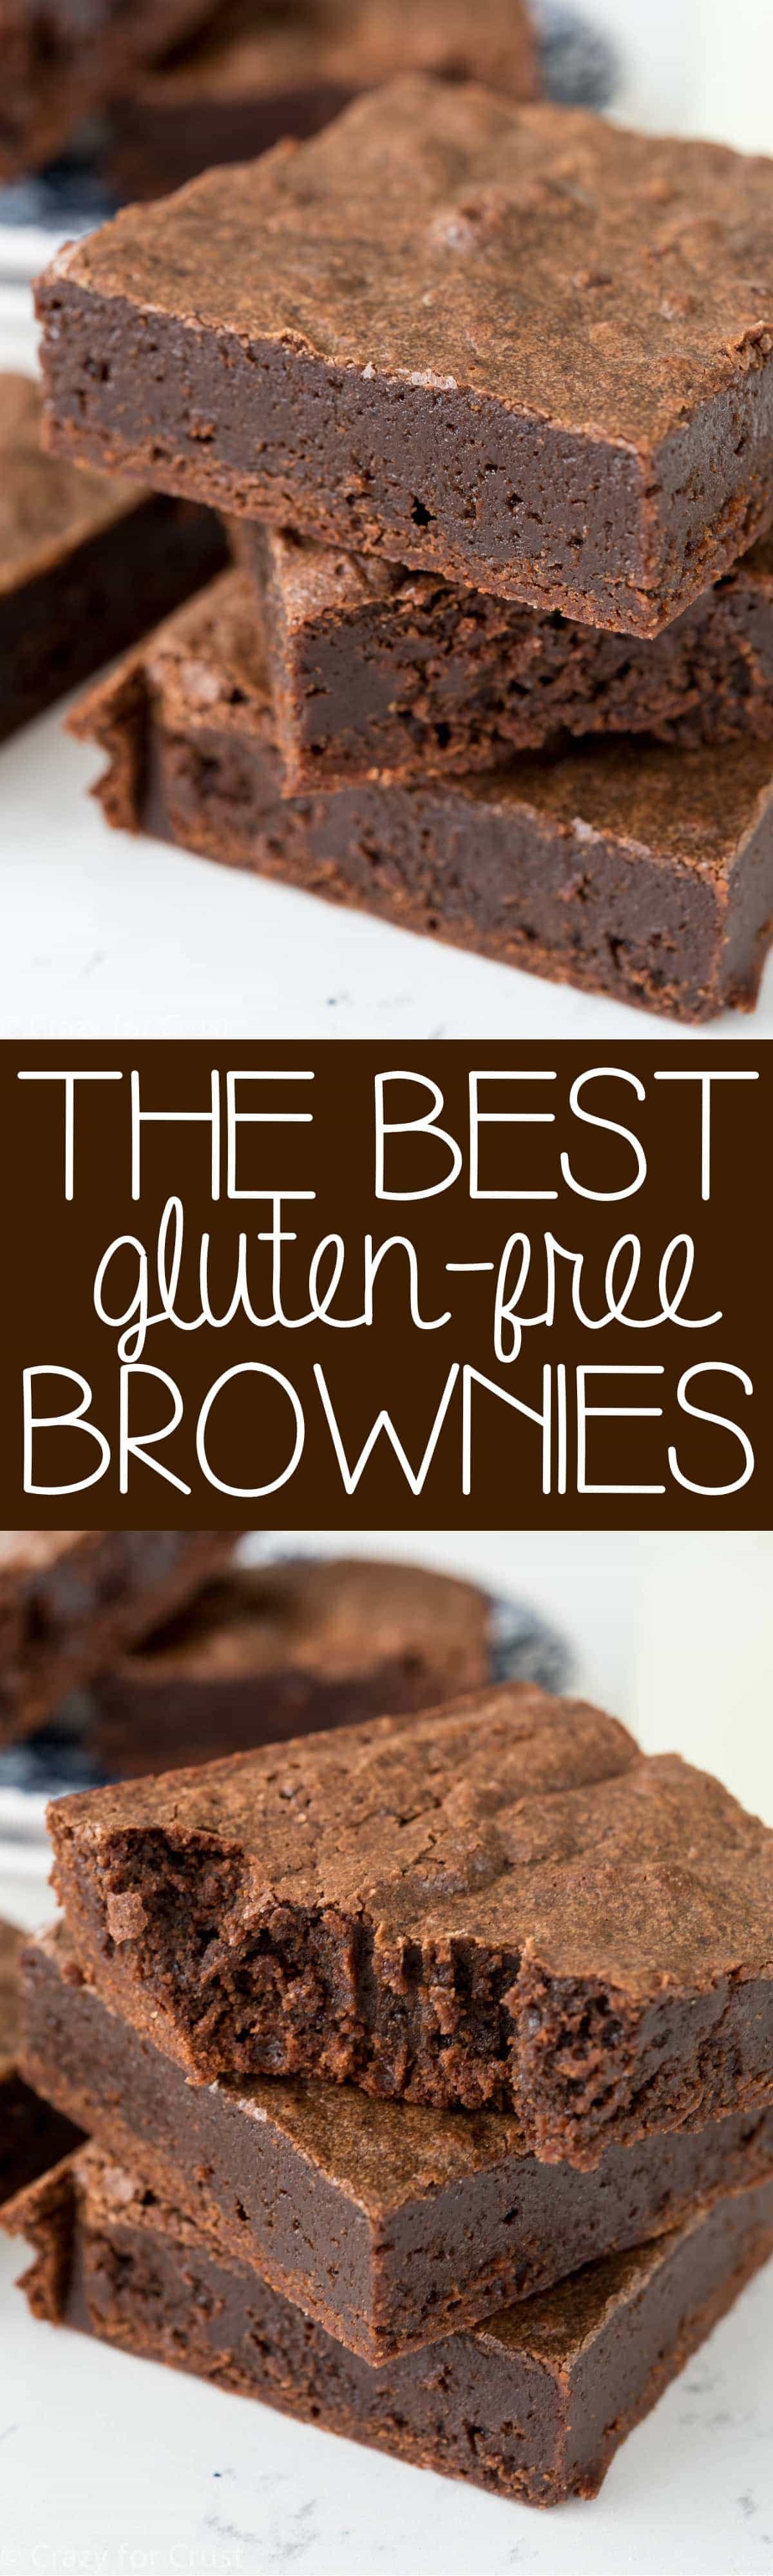 These are the BEST Gluten-Free Brownies!! It's an easy brownie recipe that yields super fudgy brownies! Even if you're not GF, you'll love these.